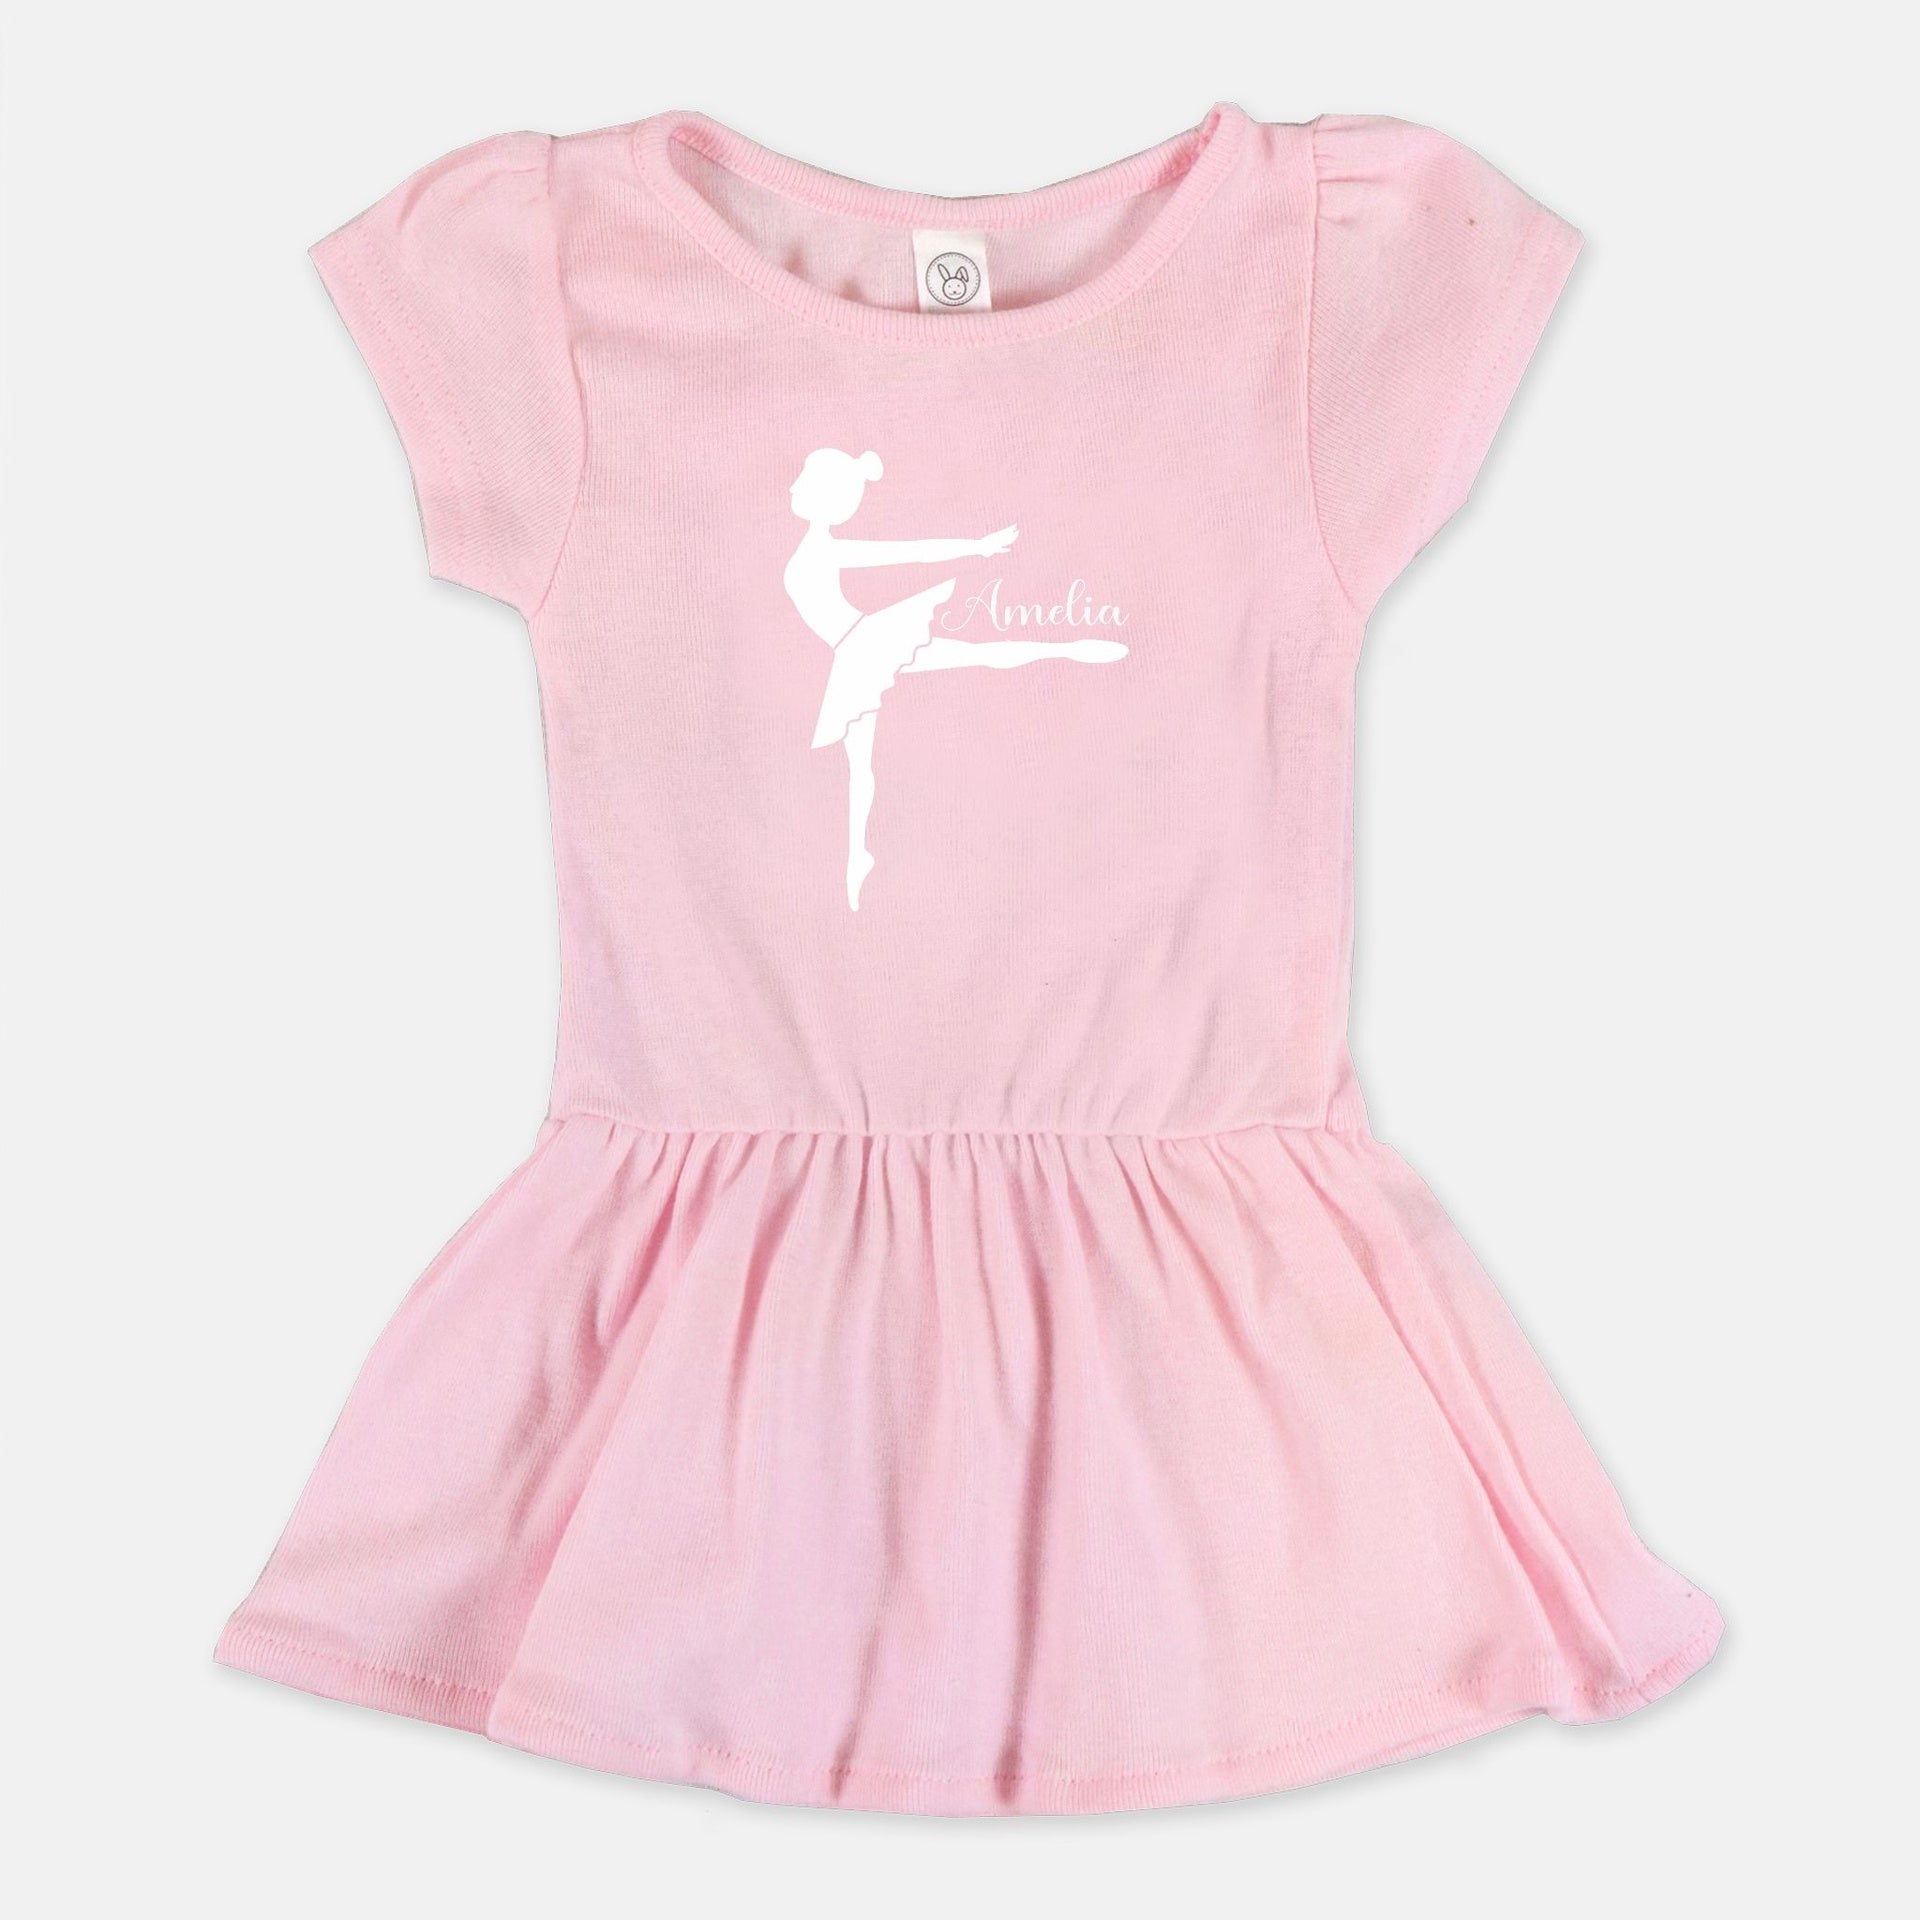 Pink Ballerina Toddler Dress - Personalized Amazing Faith Designs